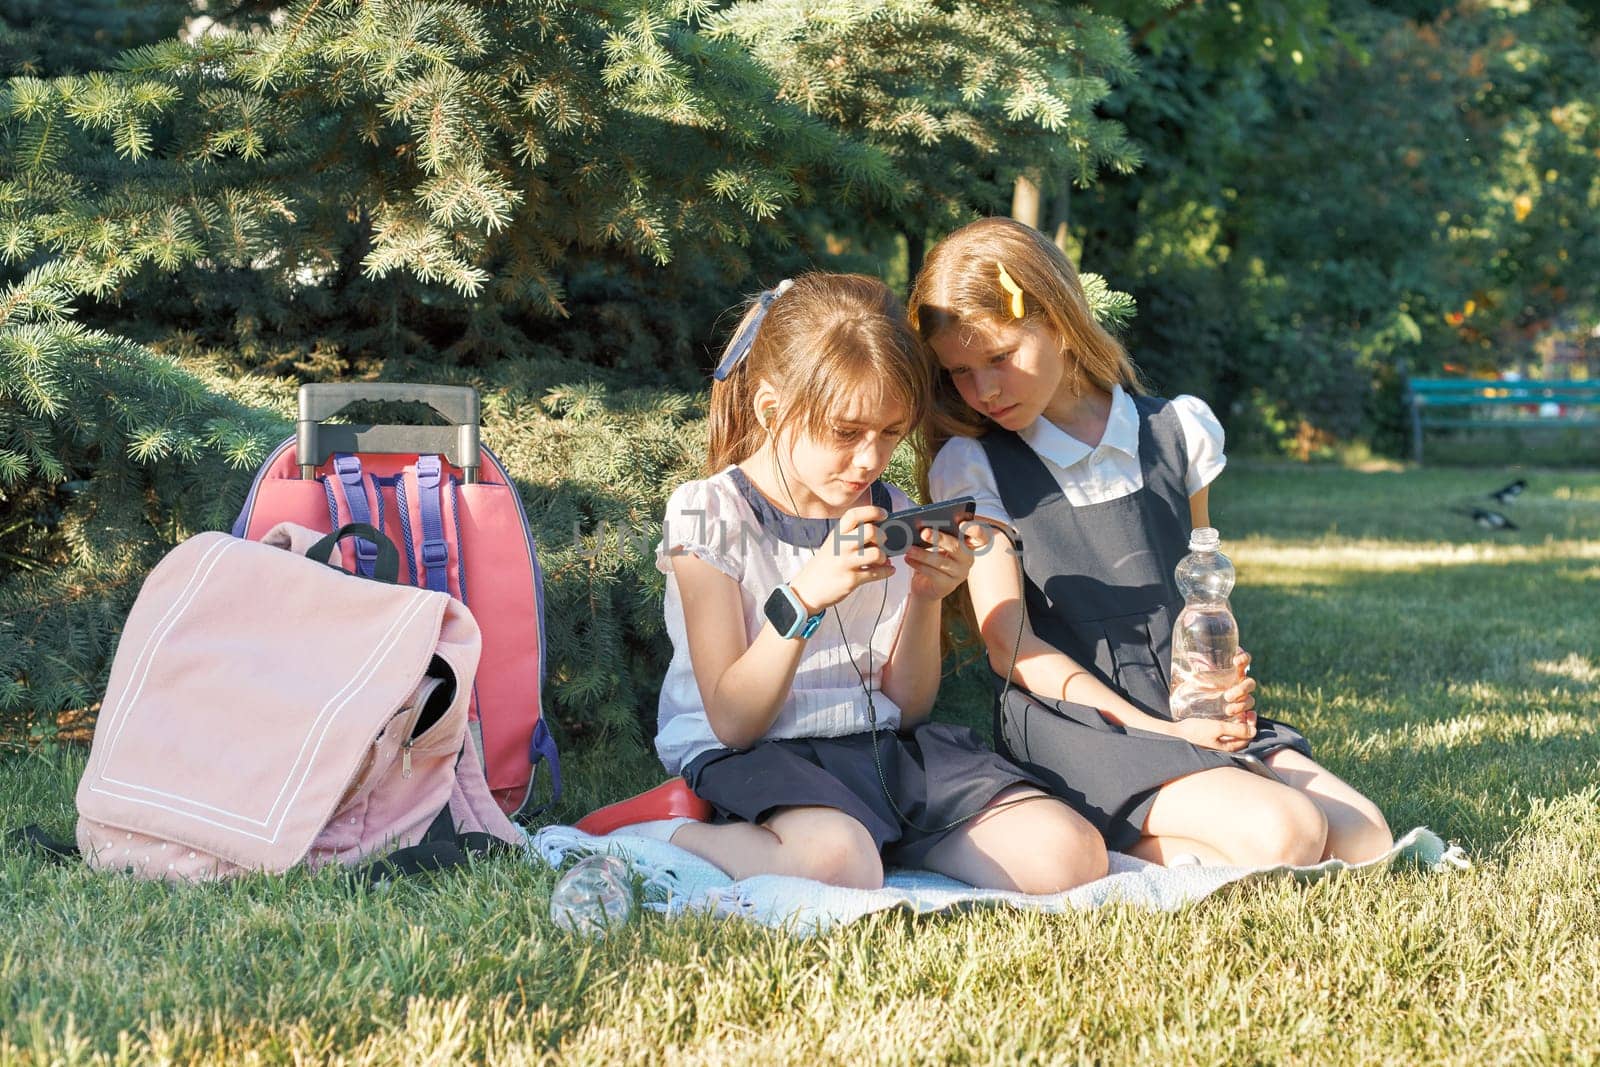 Two little schoolgirls using smartphone. Children playing, reading, looking at the phone. People, children, technology, friends and friendship concept